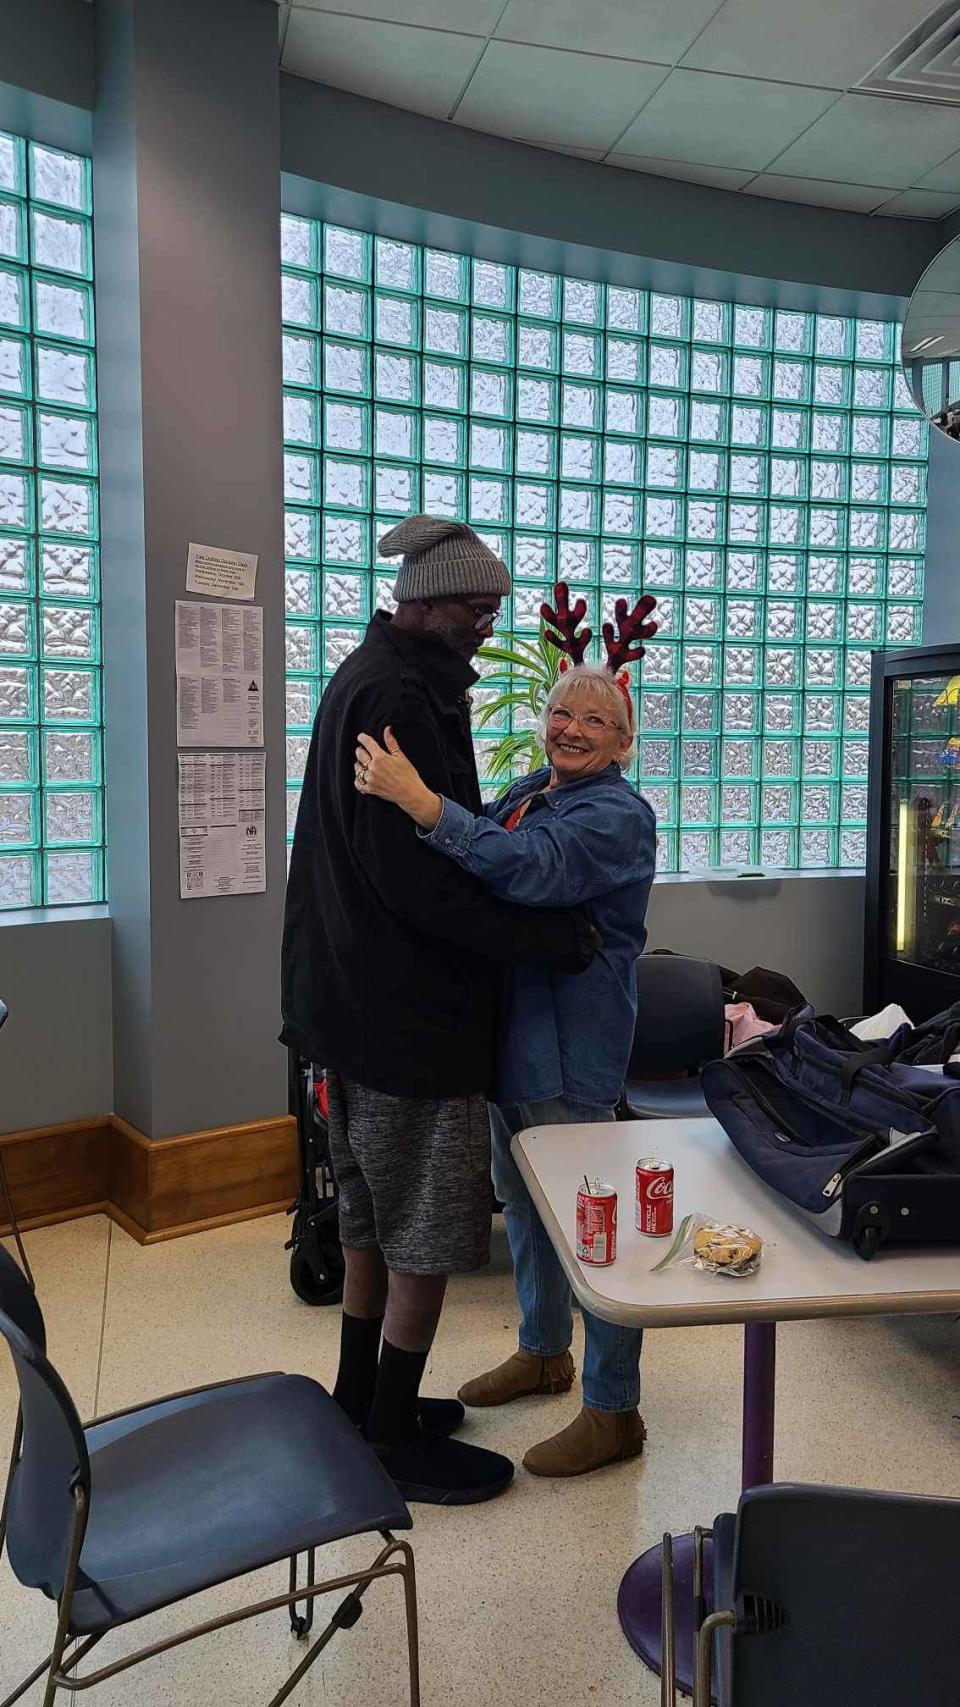 Robin Ann Carter hugs one of the homeless men who attended a Christmas party put on by Warm for the Winter also known as the Wagon Train Warriors. The group feeds homeless people every week.